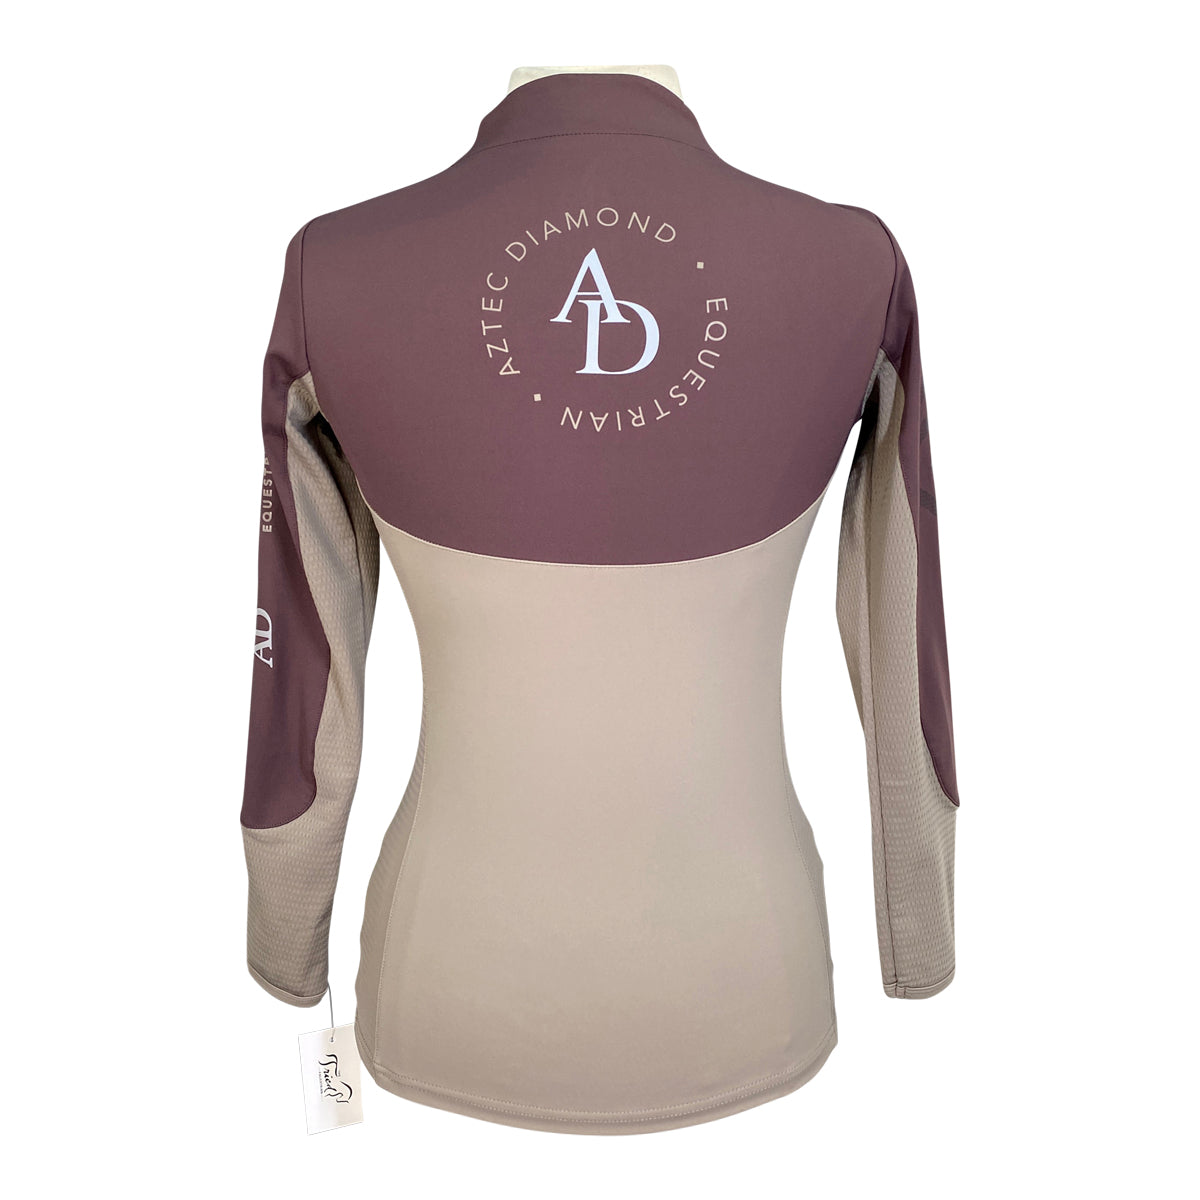 Aztec Diamond Equestrian Colour Block Base Layer in Maroon/Taupe